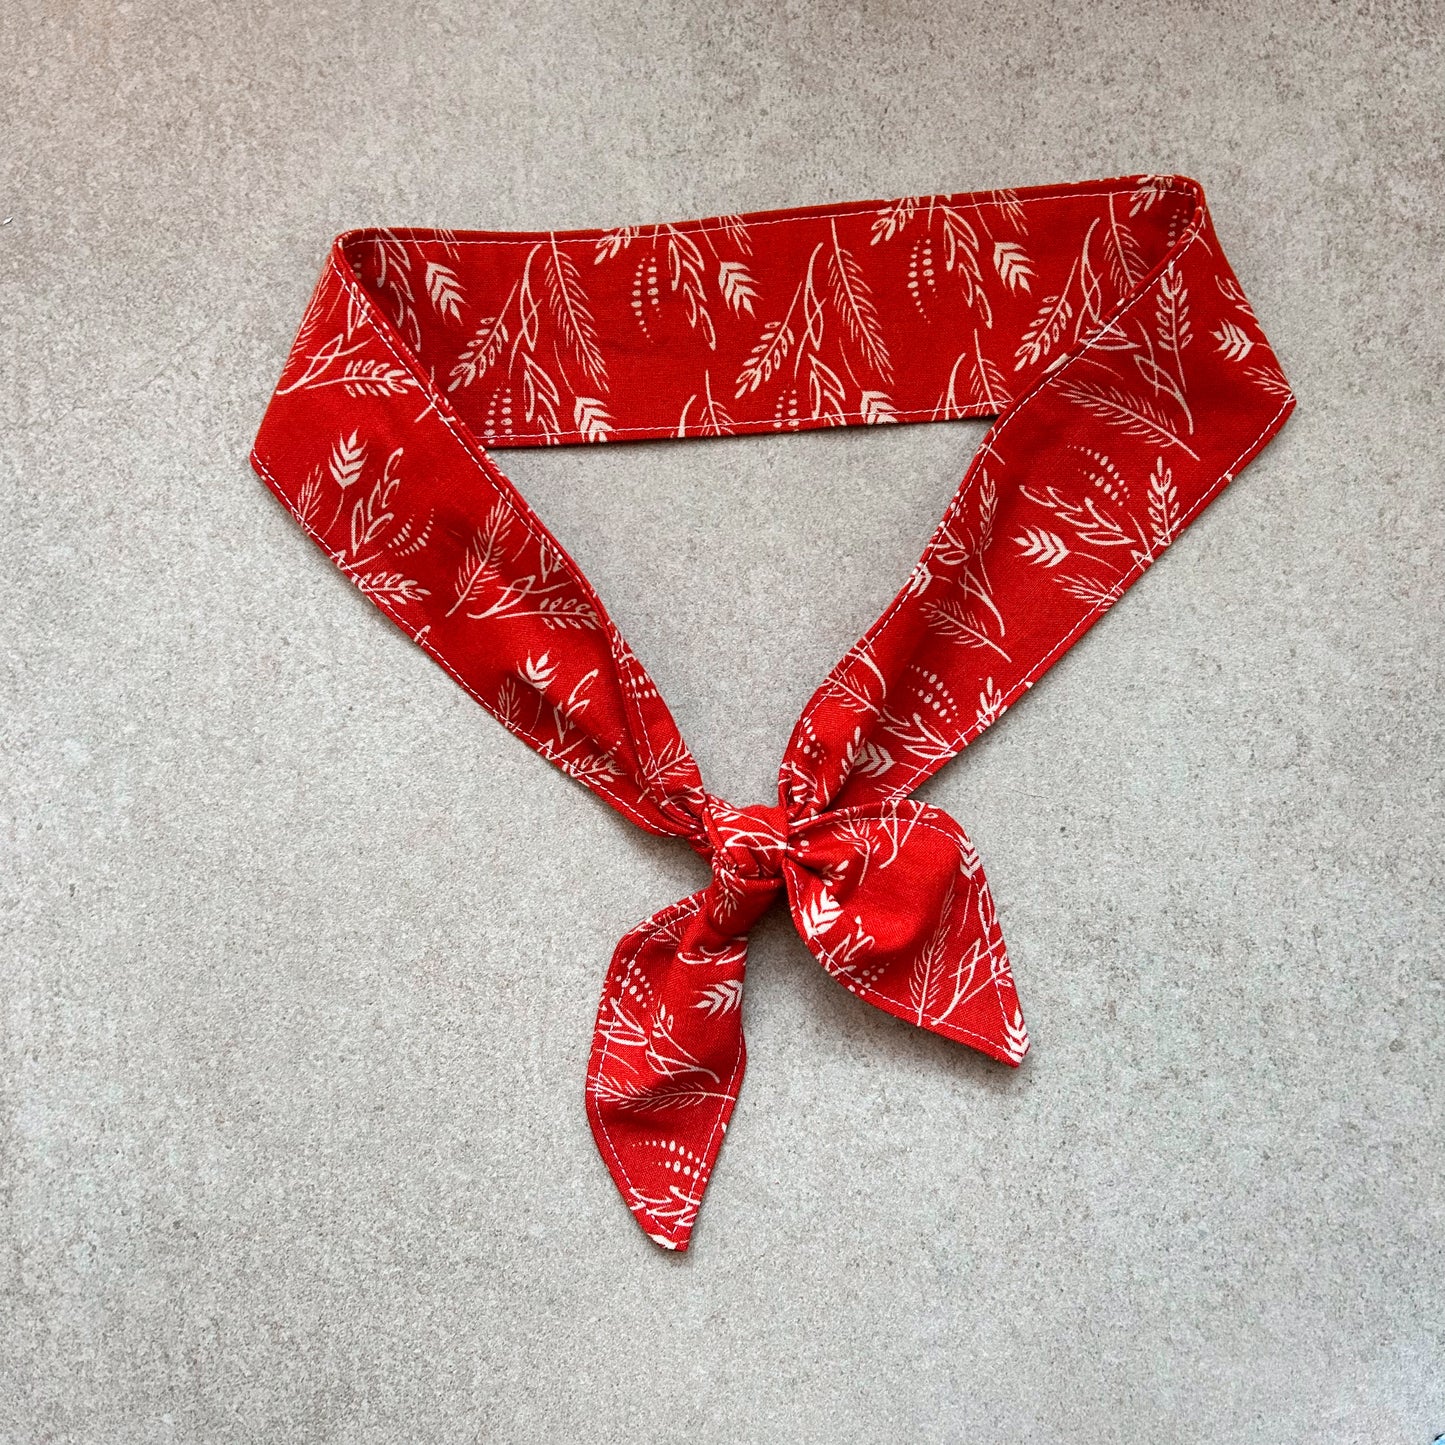 Red and White Prairie Scarf Tie